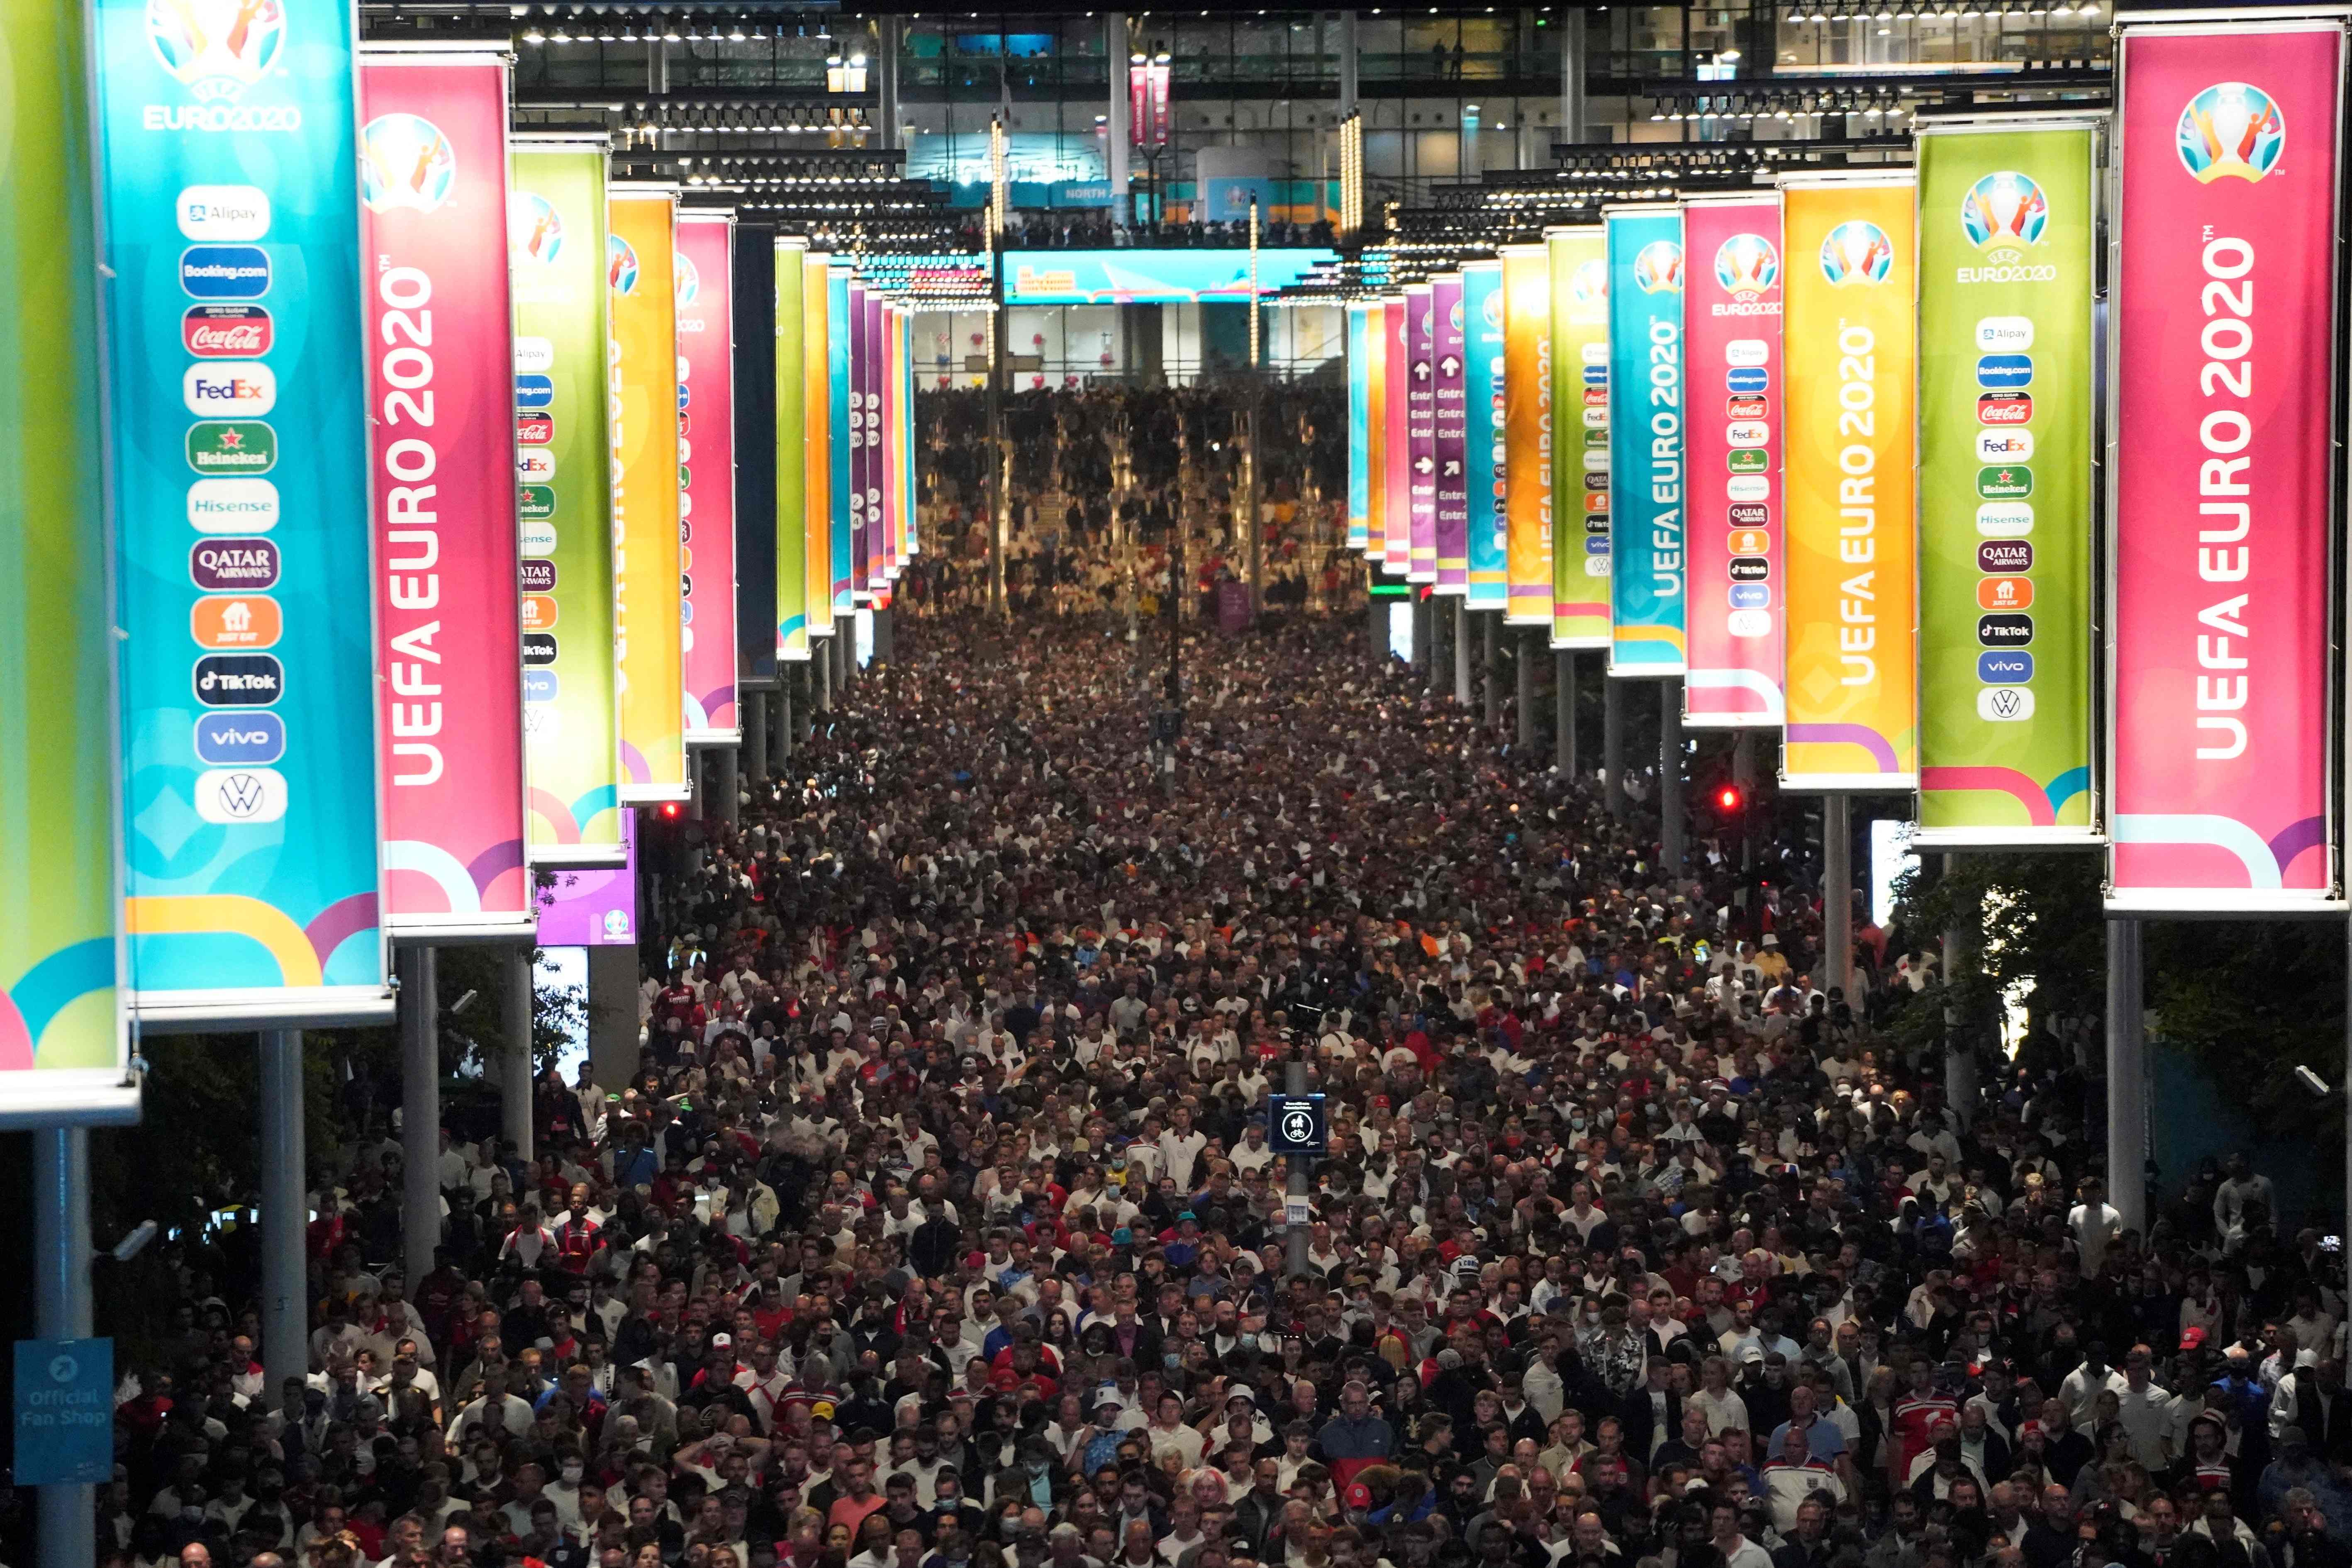 TOPSHOT - Crowds leave Wembley Stadium after Italy wins the UEFA EURO 2020 final football match between England and Italy in northwest London on July 11, 2021. (Photo by Niklas HALLE'N / AFP)